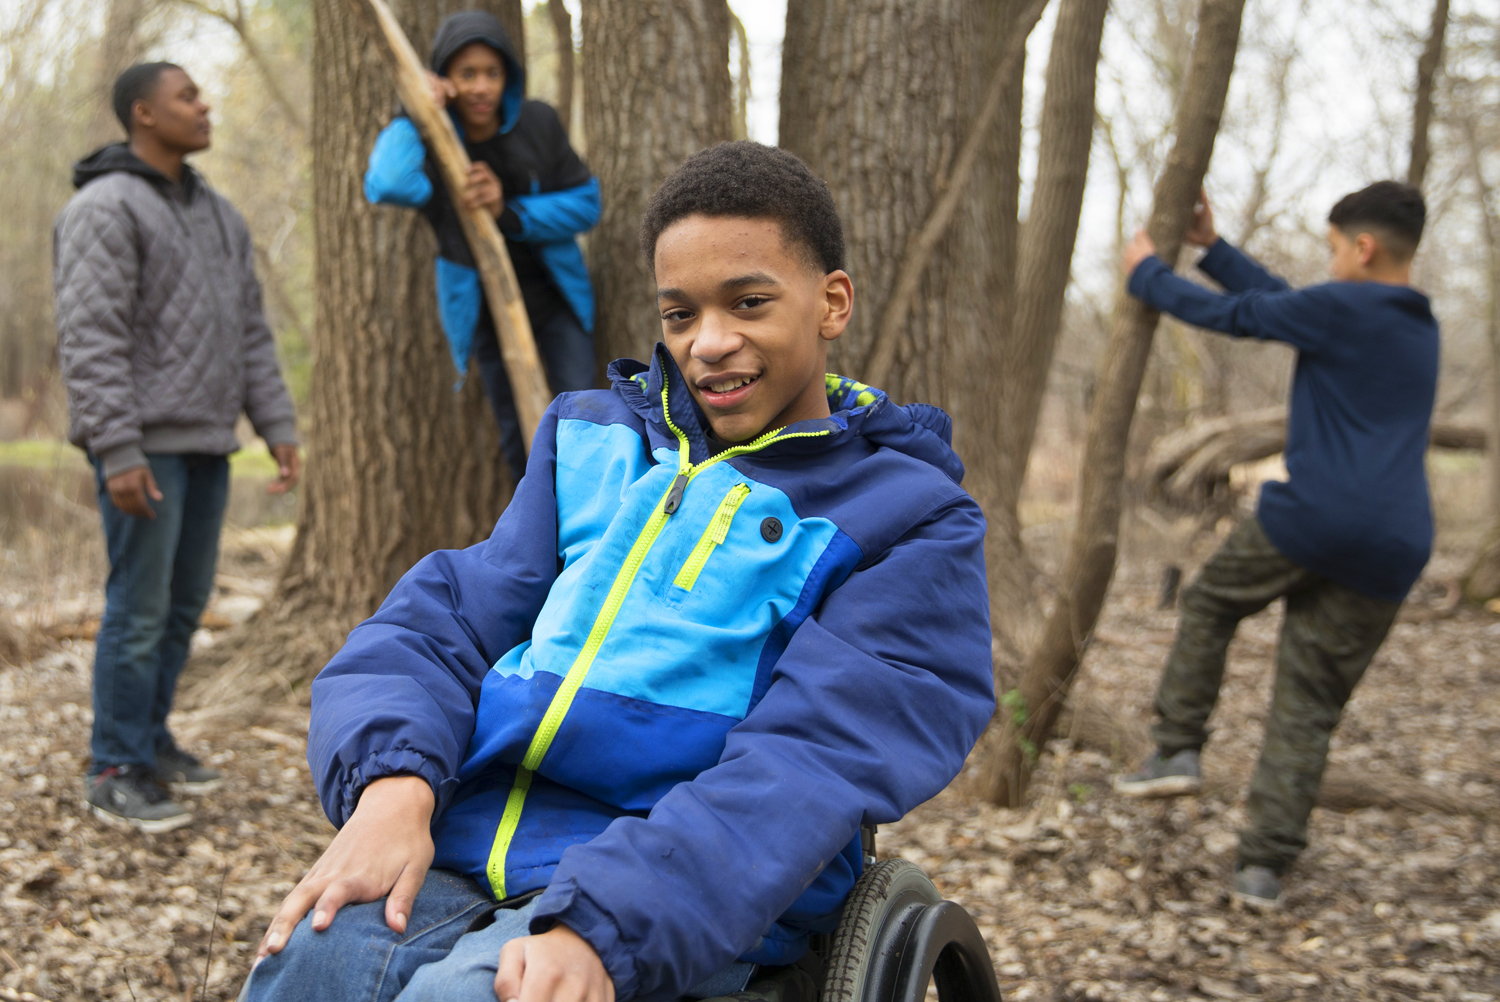 Elijah, who has cerebral palsy, enjoys playing in the woods with his buddies.